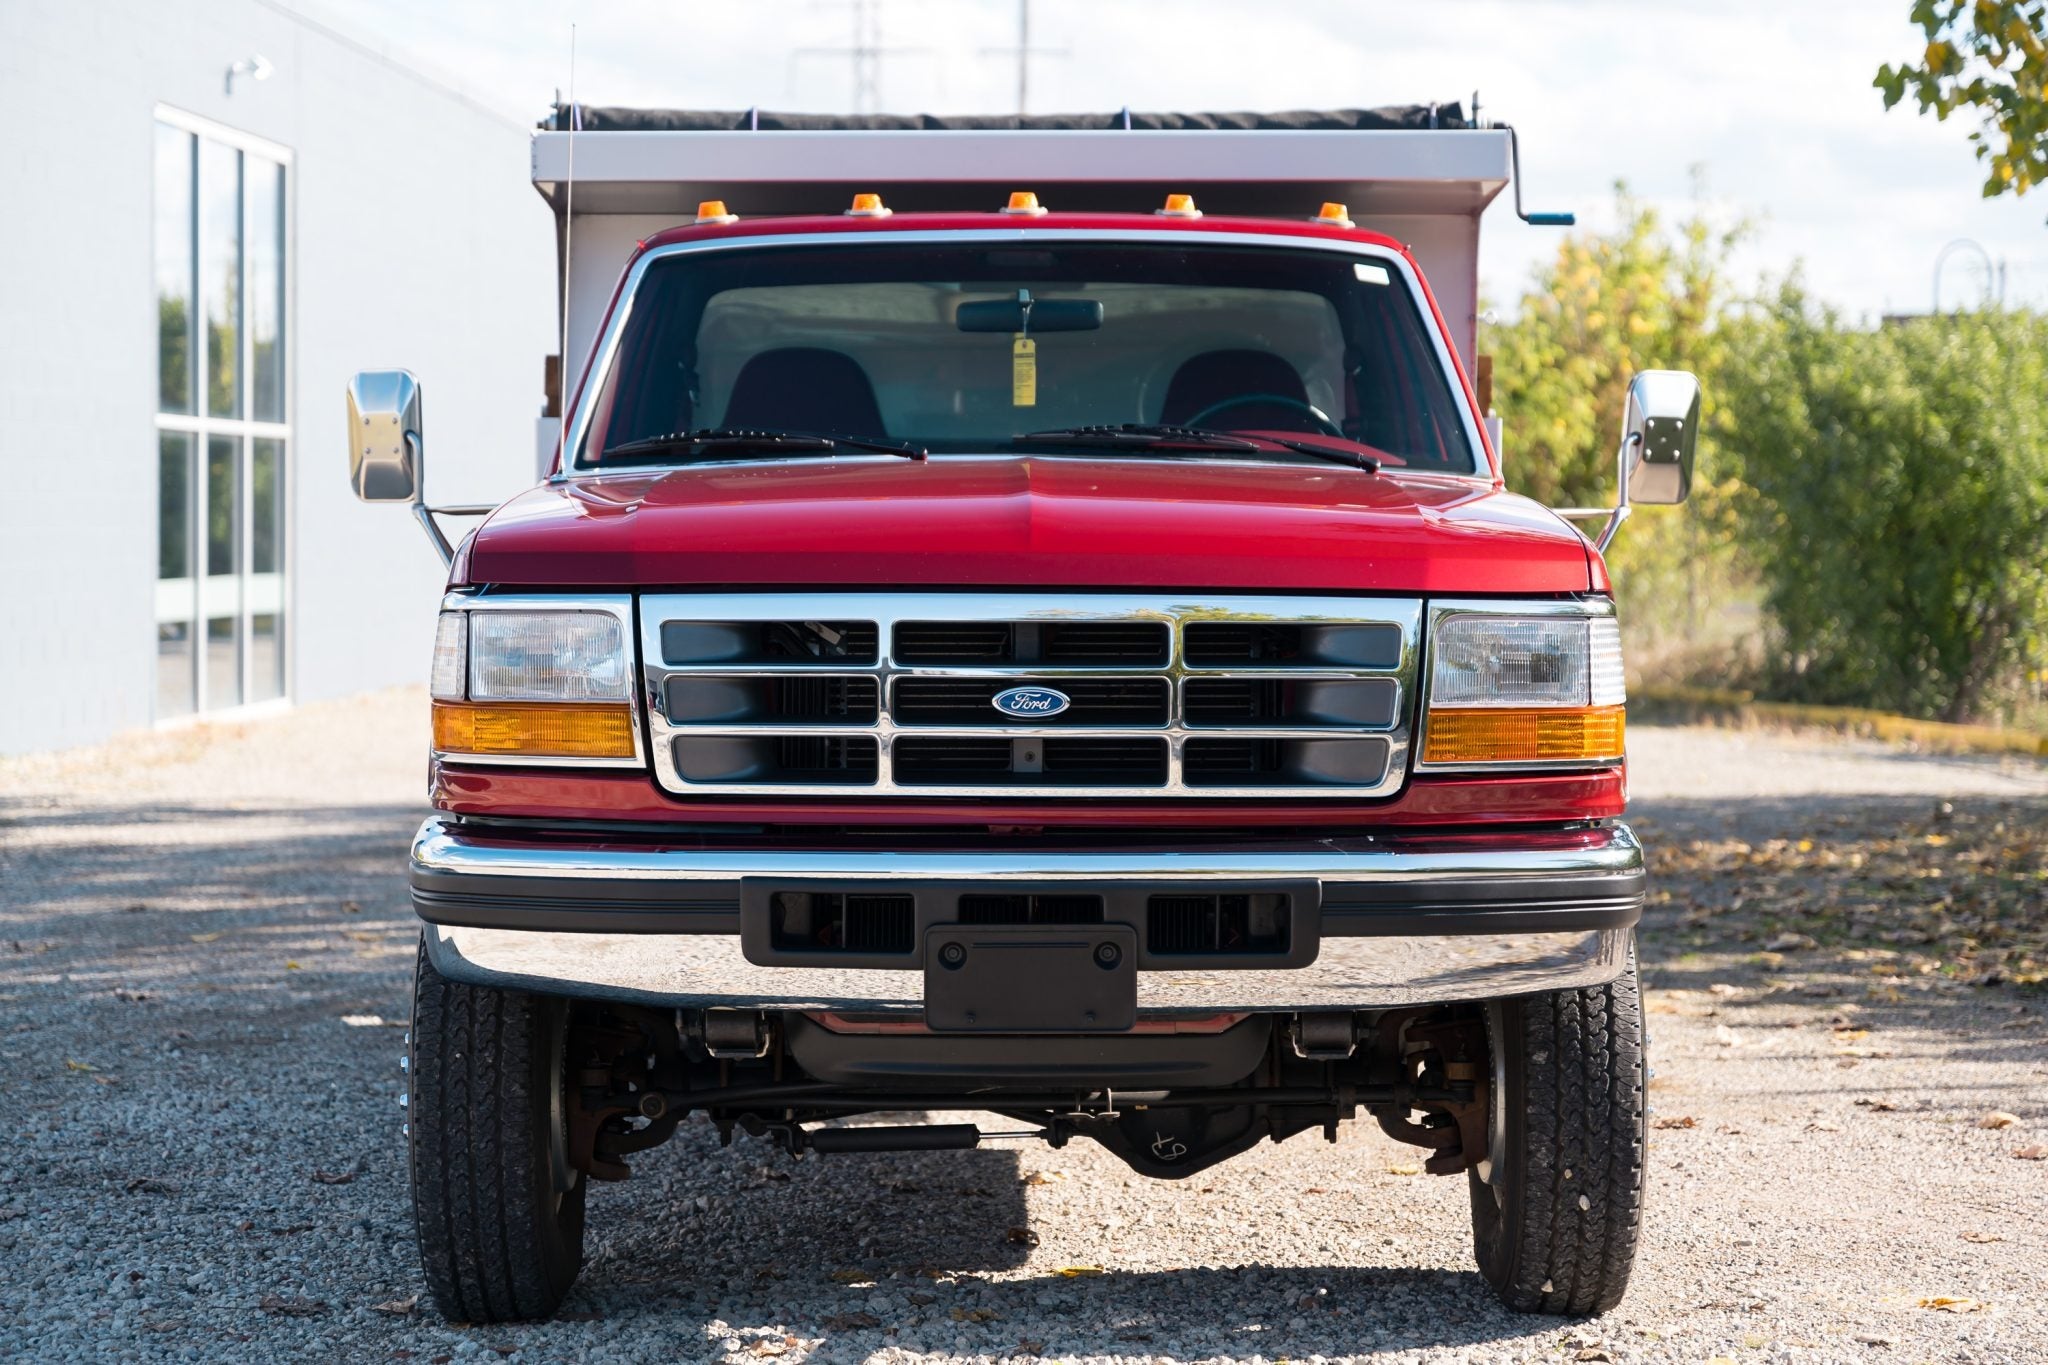 here's why this 1997 ford dump truck is almost a steal at $72k